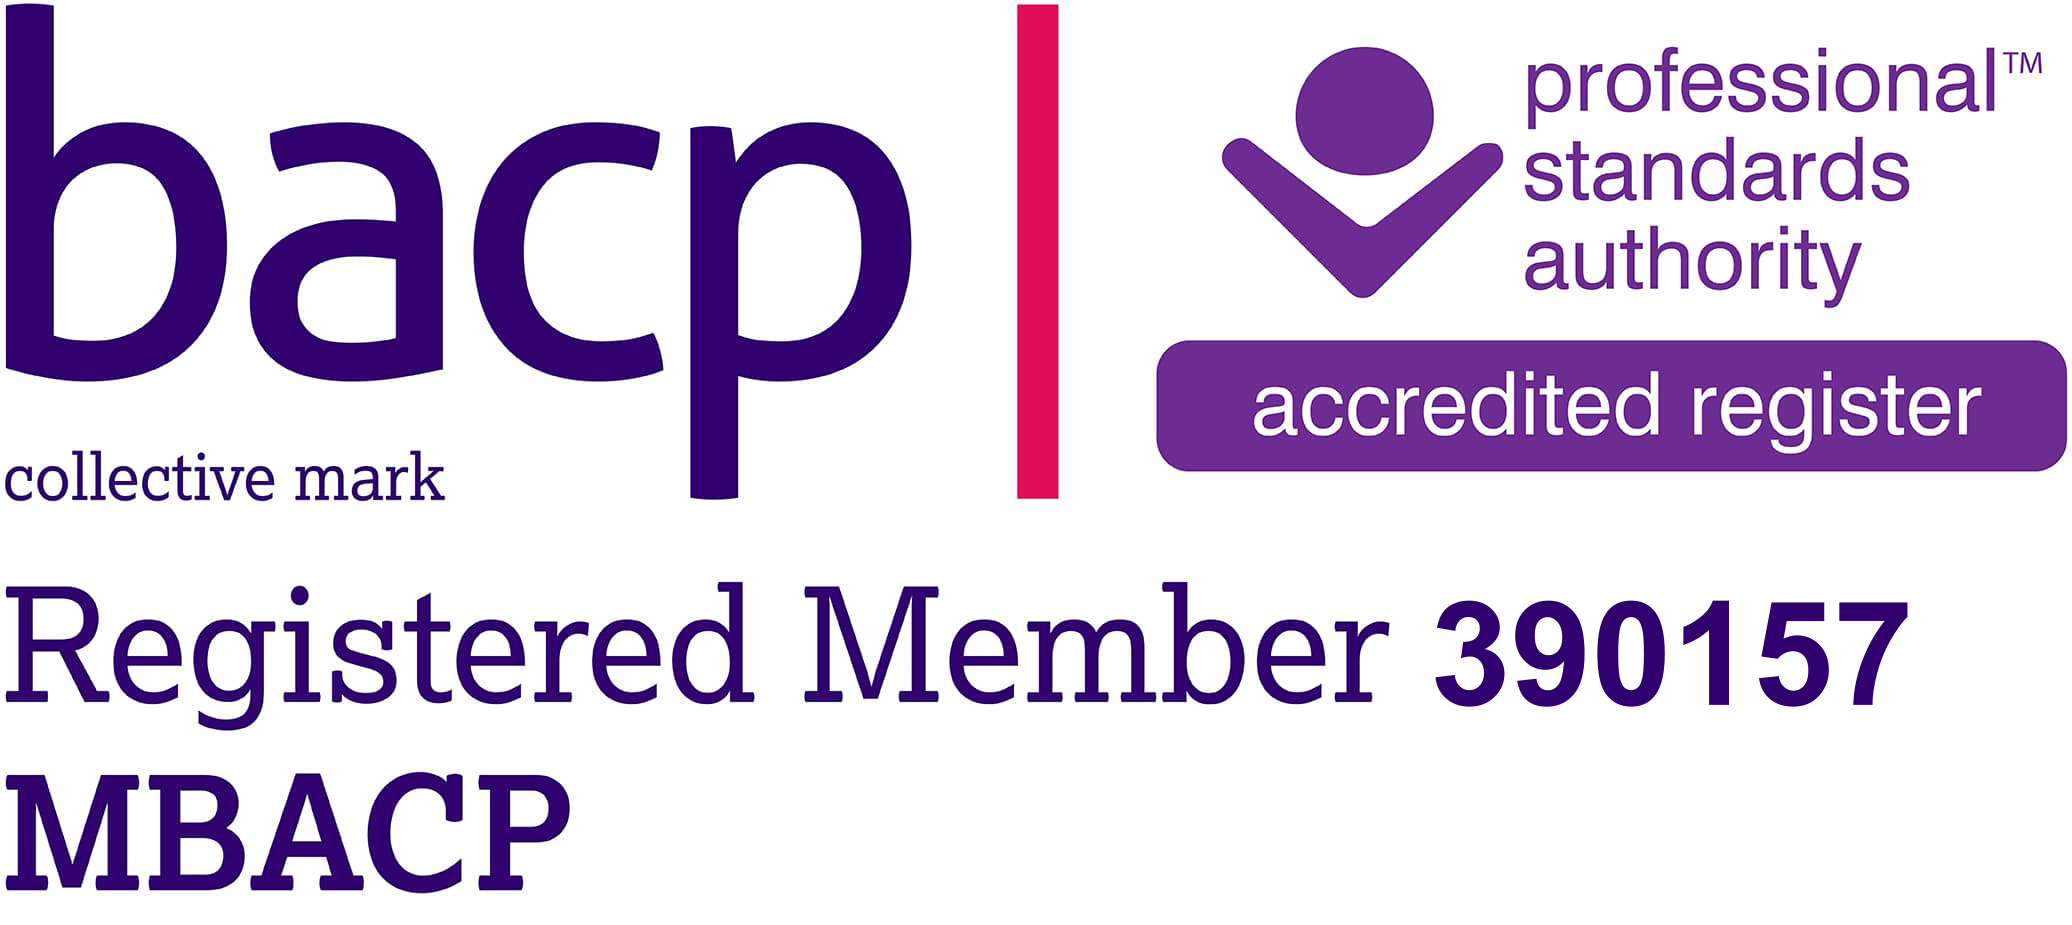 Registered Practitioner badge for the British Association for Counselling and Psychotherapy